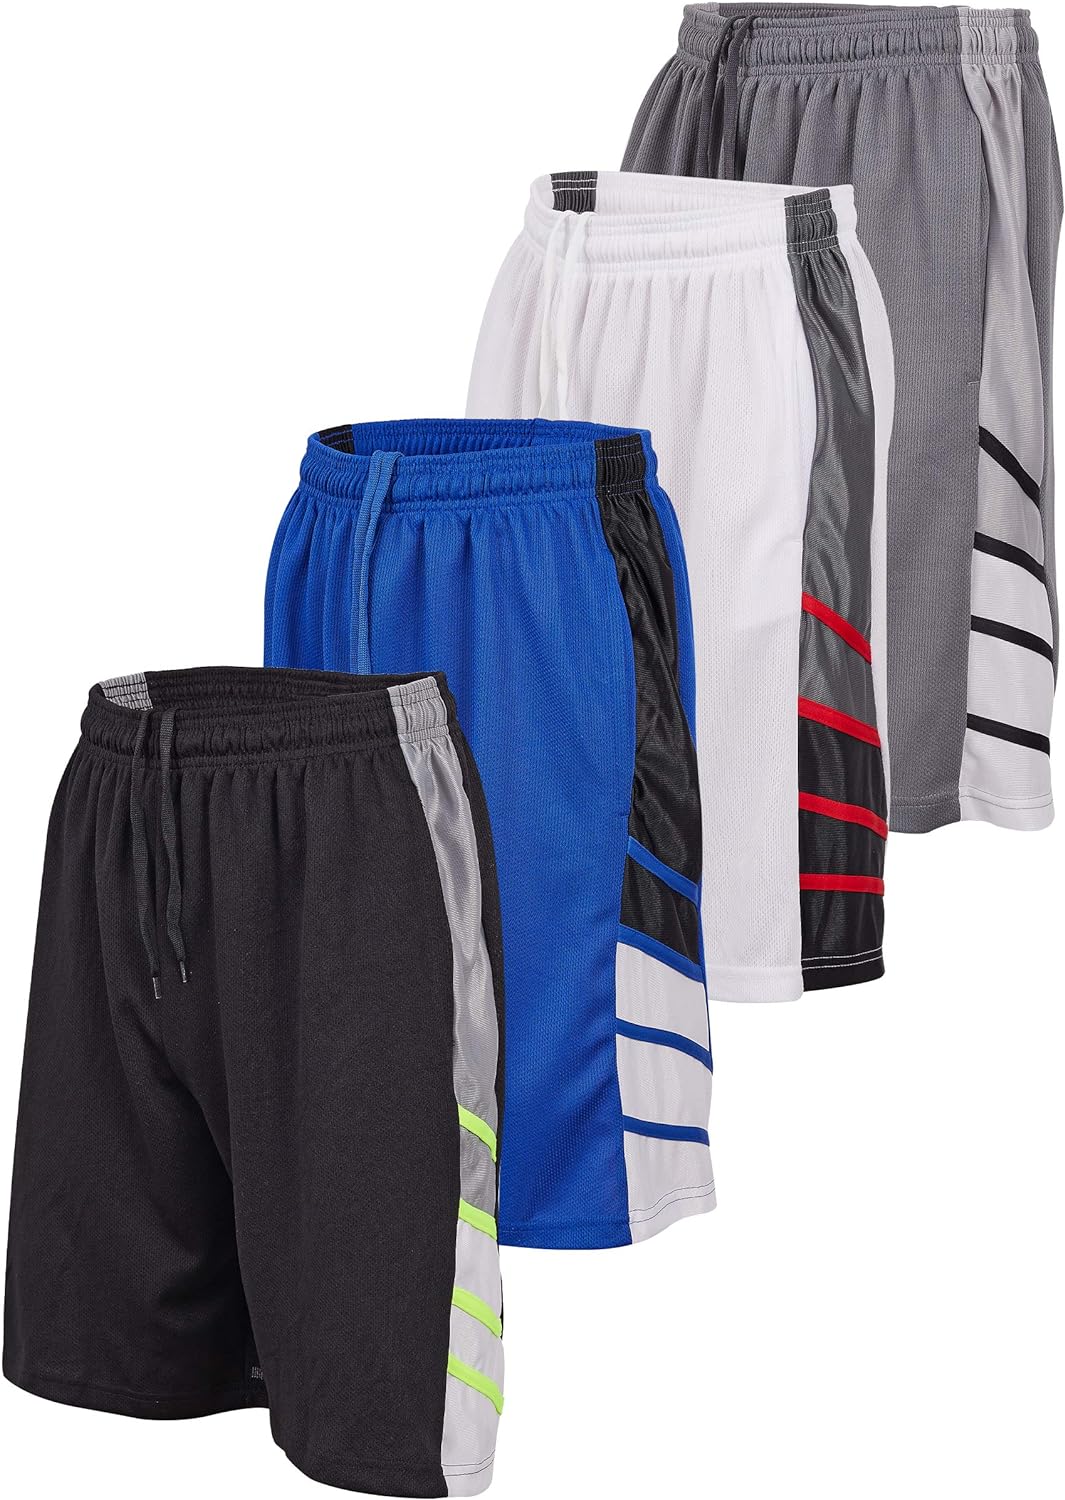 Athletic Workout Shorts for Men with Pockets Quick Dry Activewear 